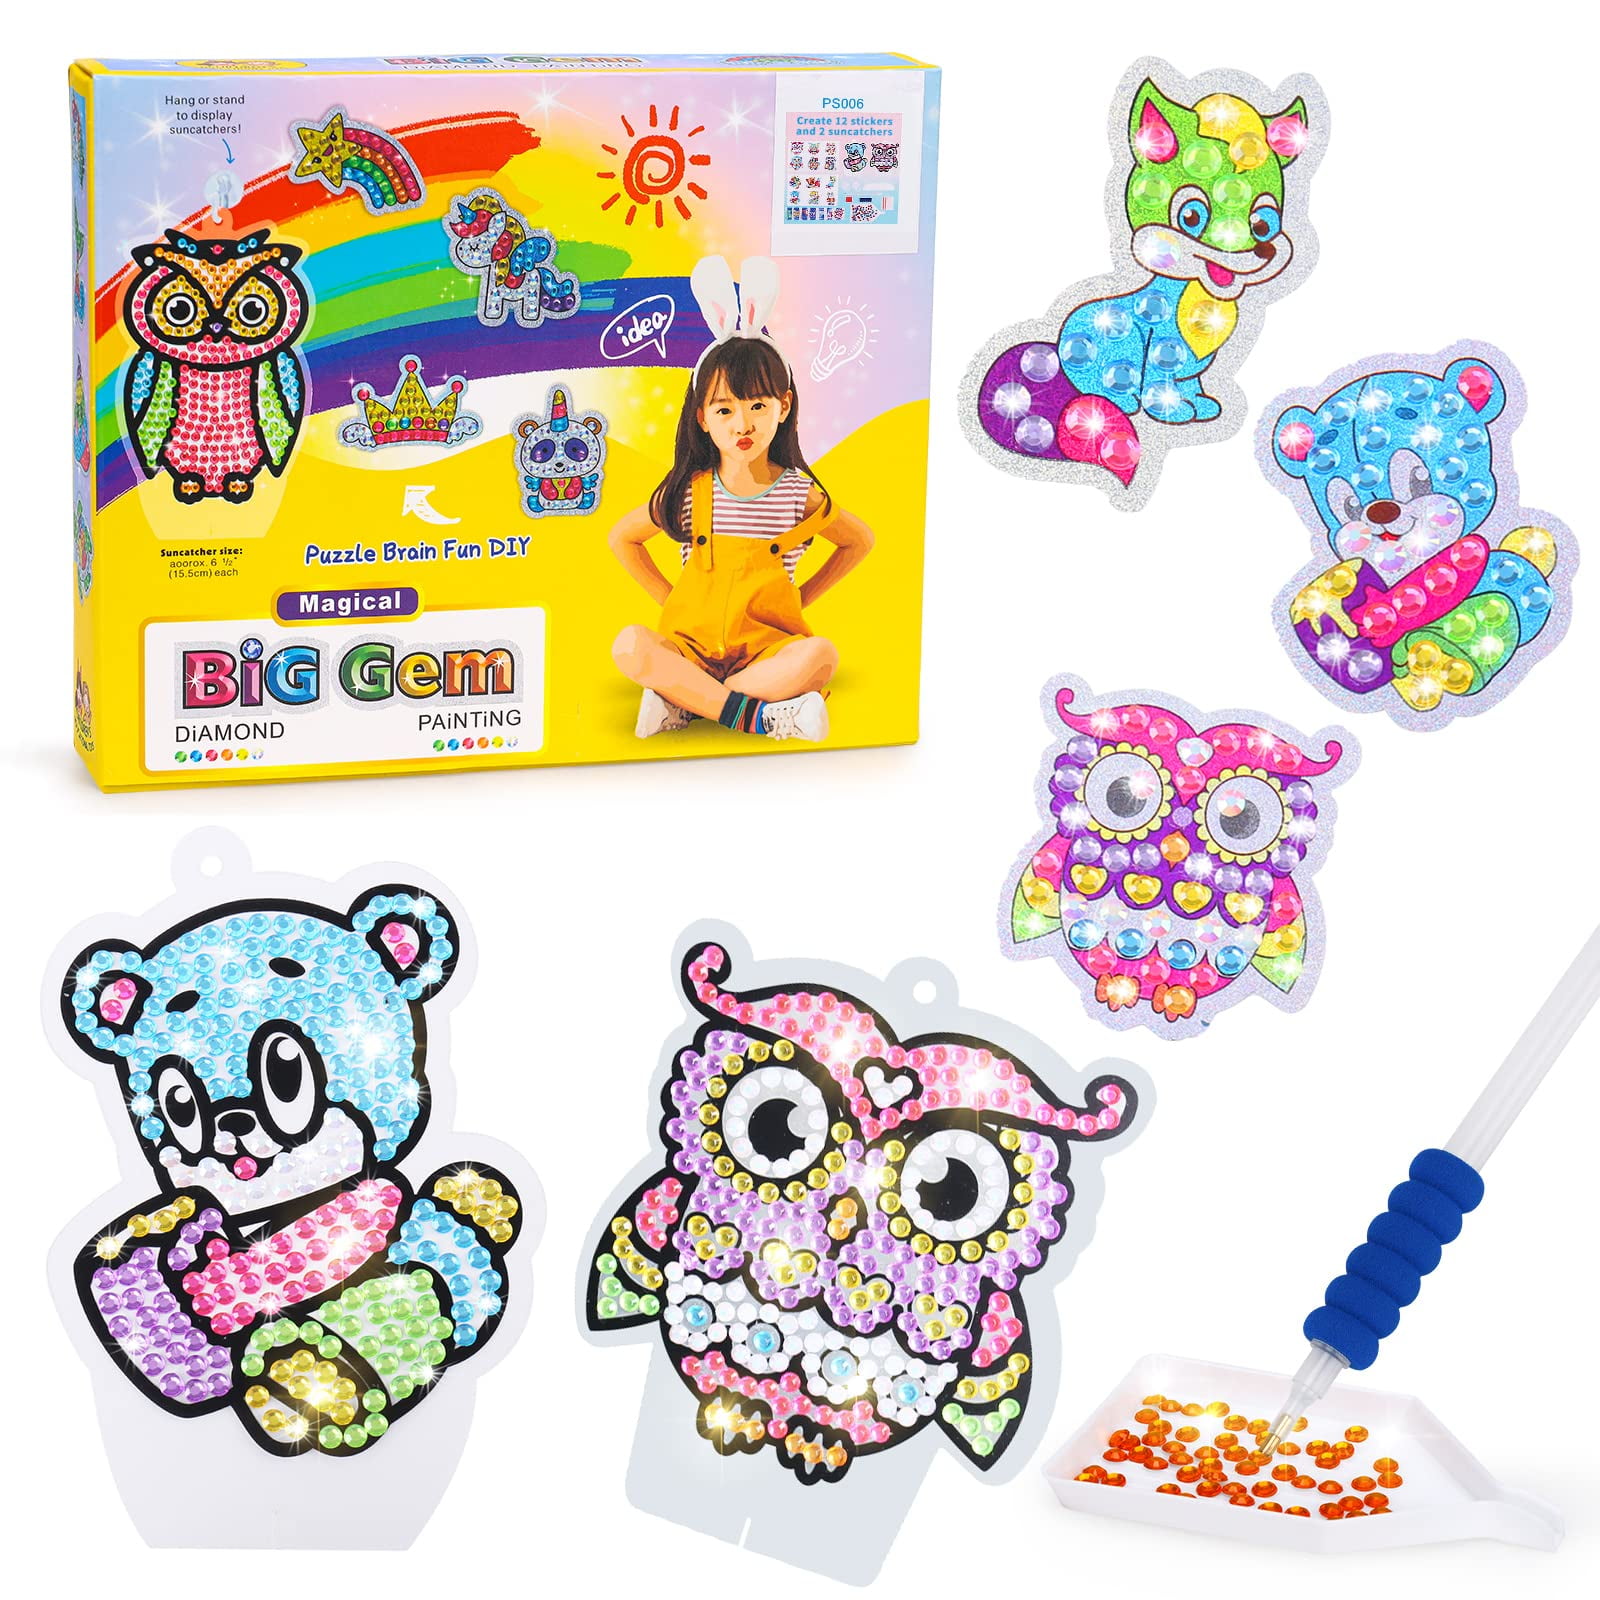 Kids Create Your Own Sweets 12/24 Stickers DIY Arts Crafts Girls Boys  Magical 5D Big Gem Diamond Painting Kit Beginner Toys Gift - Realistic  Reborn Dolls for Sale